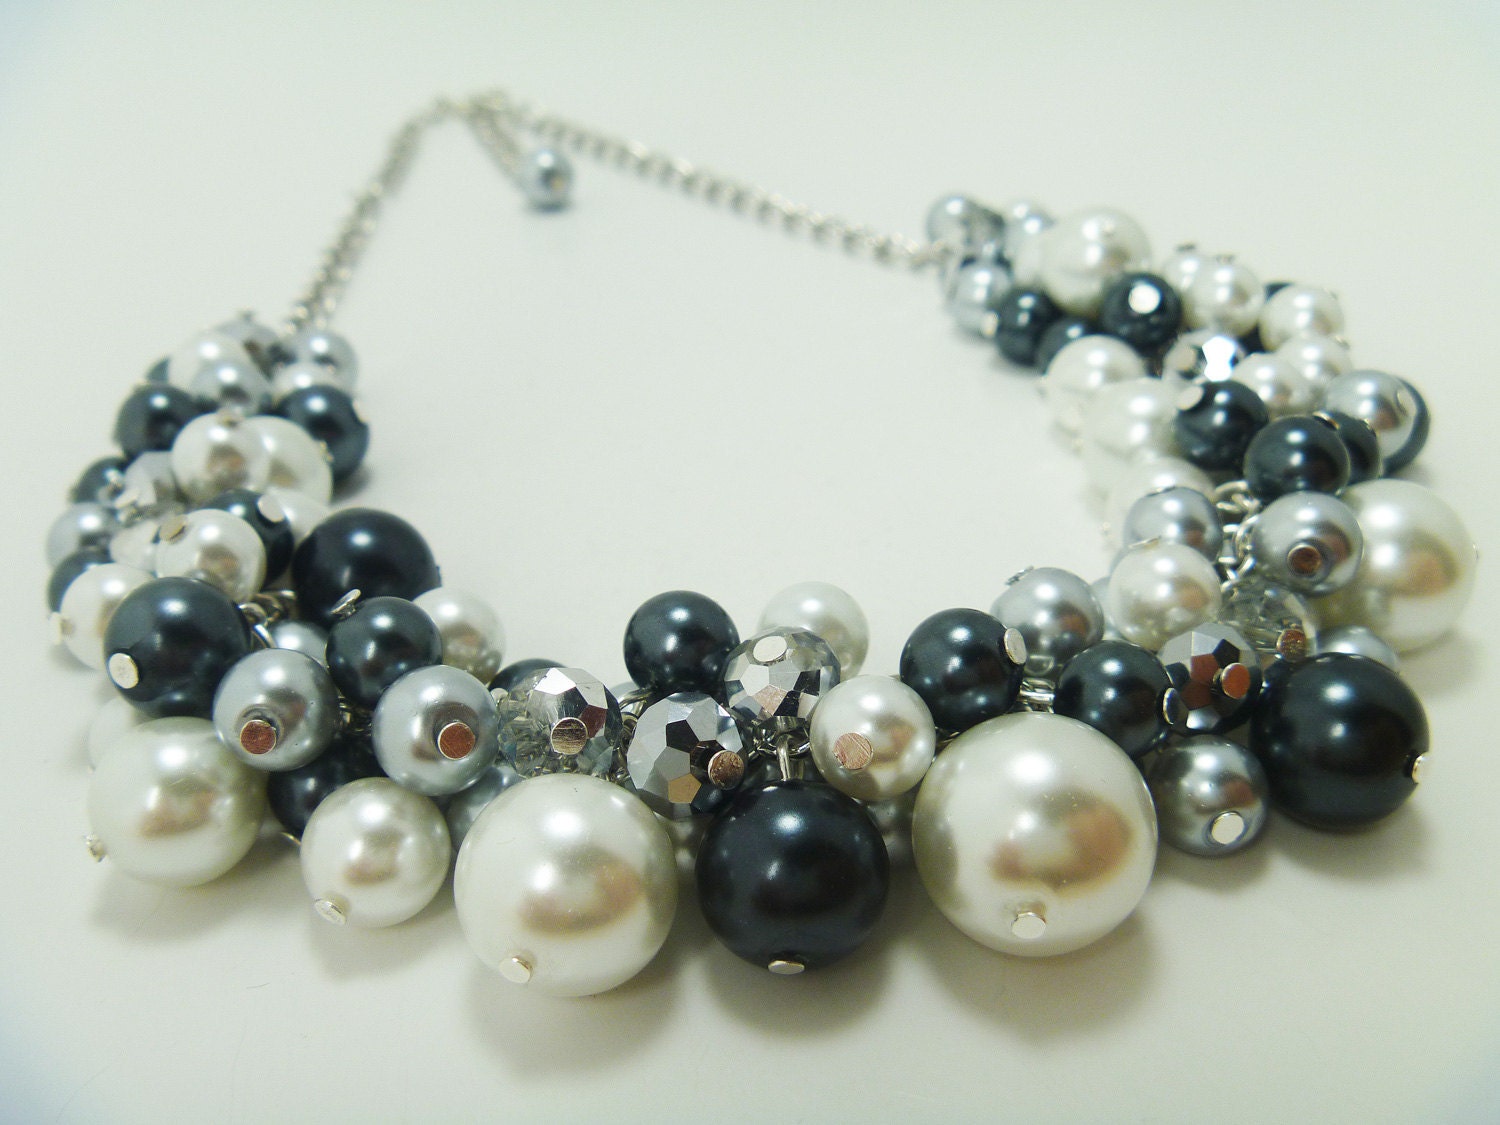 White Necklace on Chunky Pearl Necklace   White  Gray And Black Cluster Of Pearls With